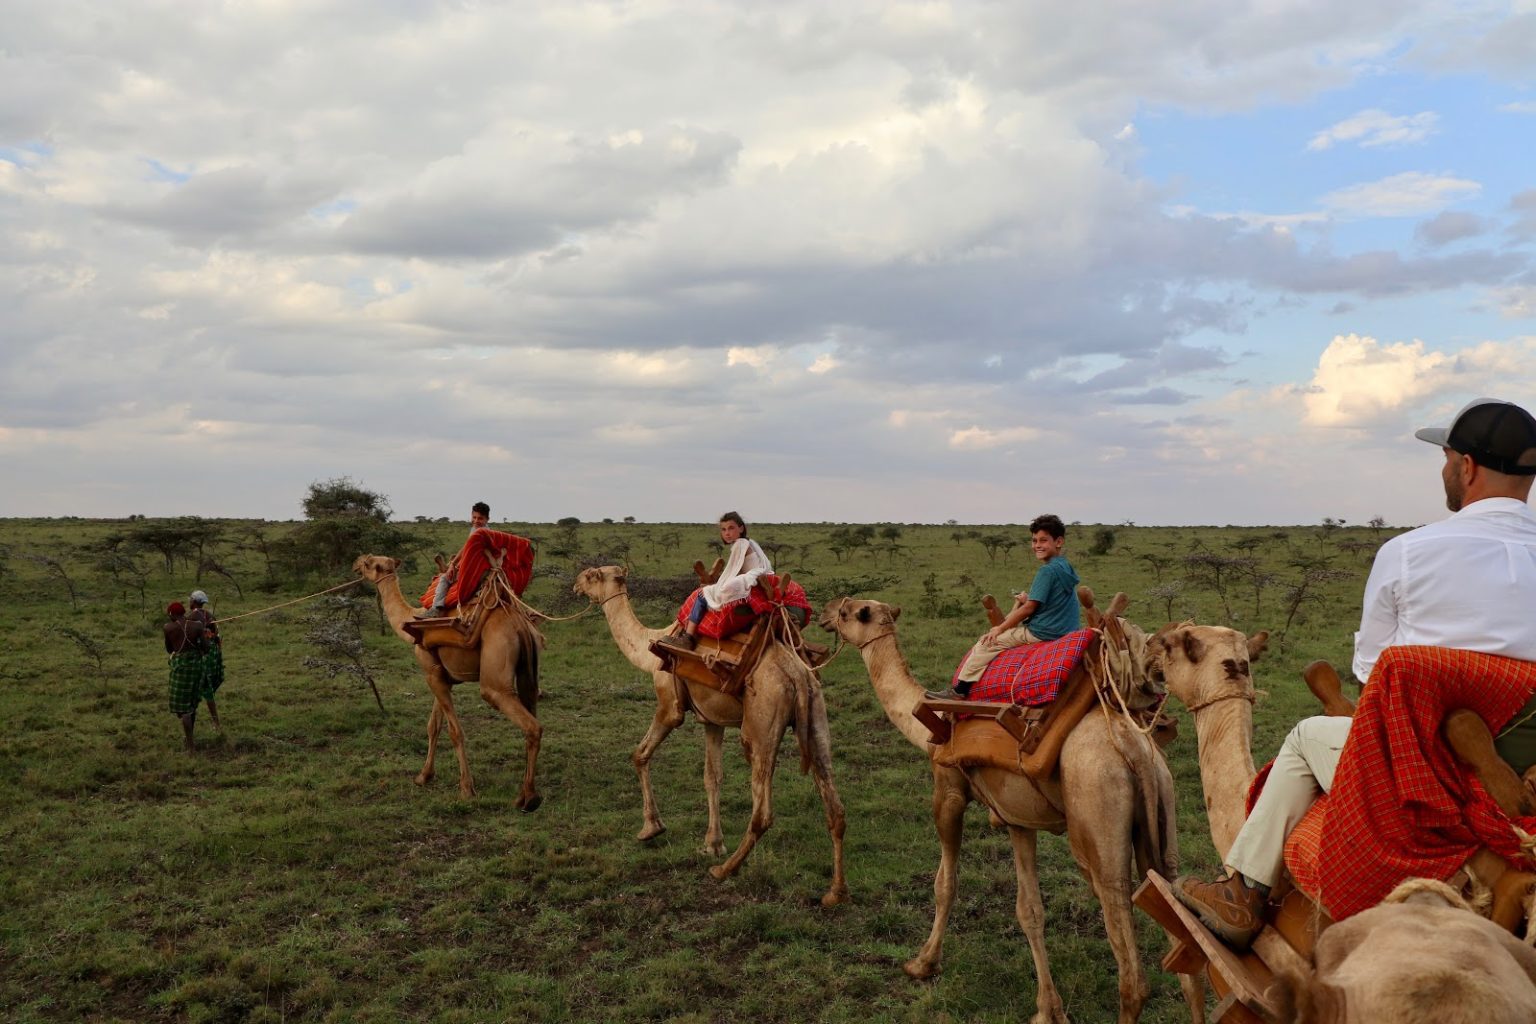 Mollie’s family rides atop camels on safari, following the lead of their guide